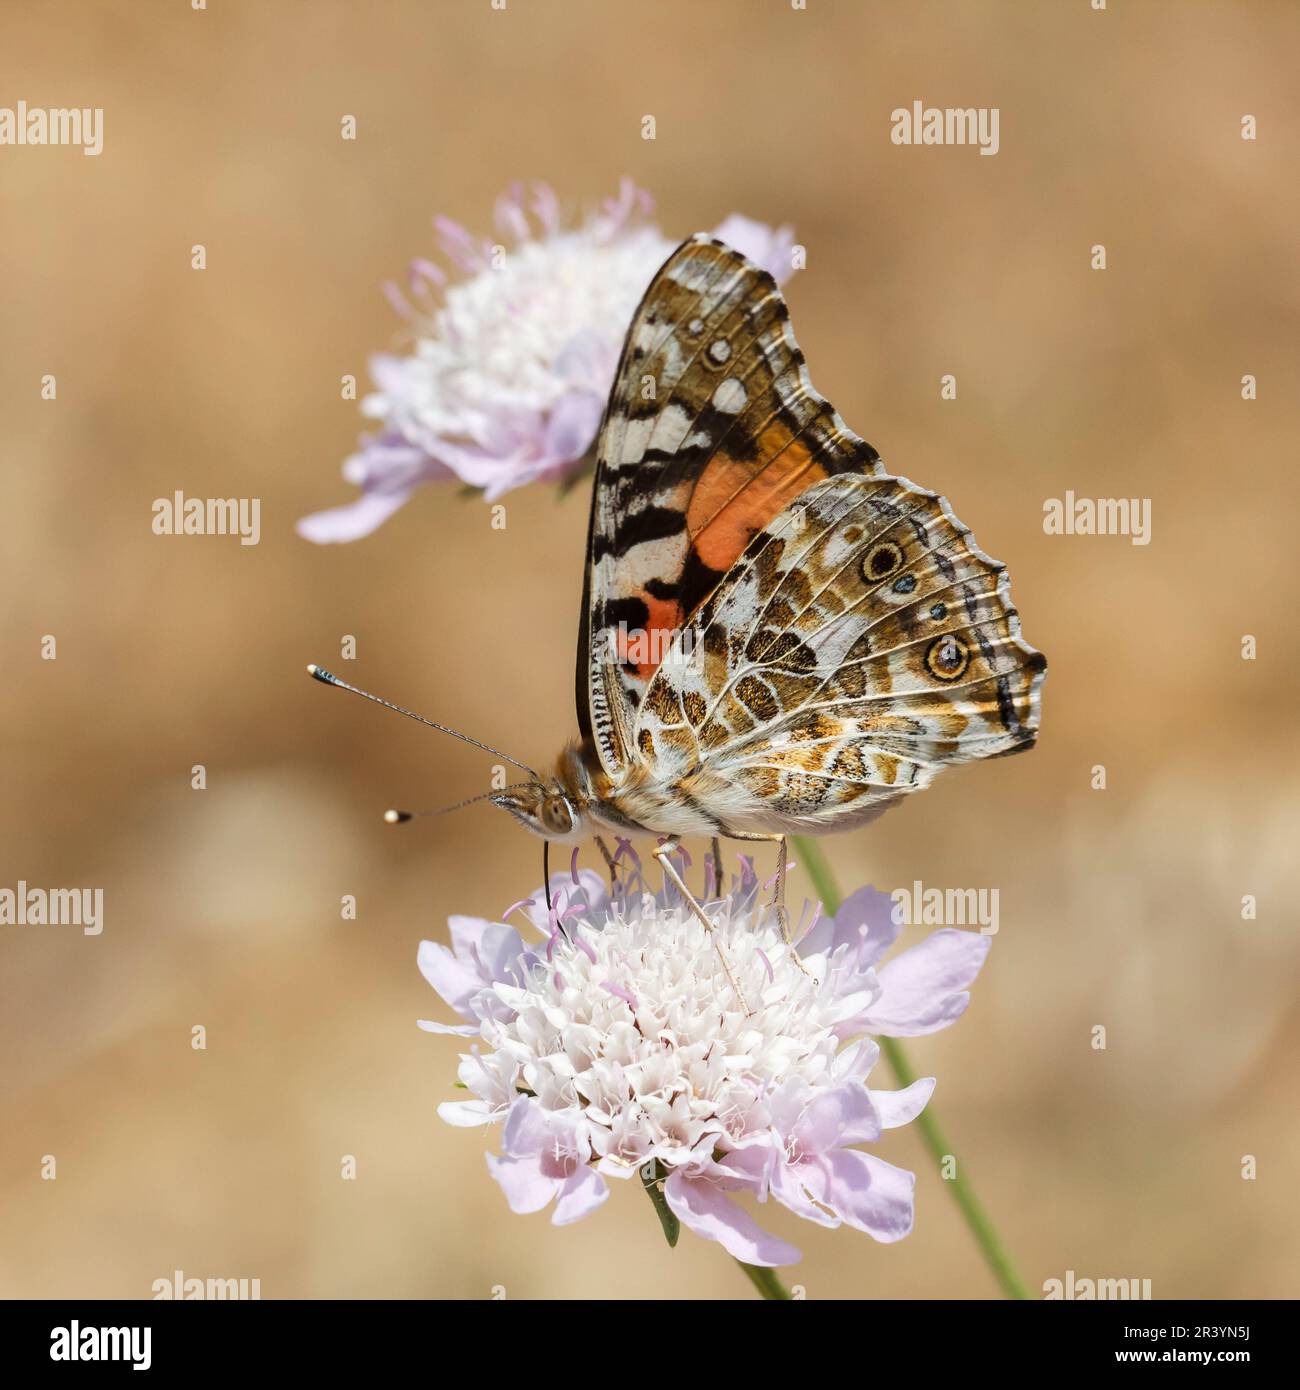 Vanessa cardui, syn. Cynthia cardui, known as Painted lady, Painted lady butterfly Stock Photo